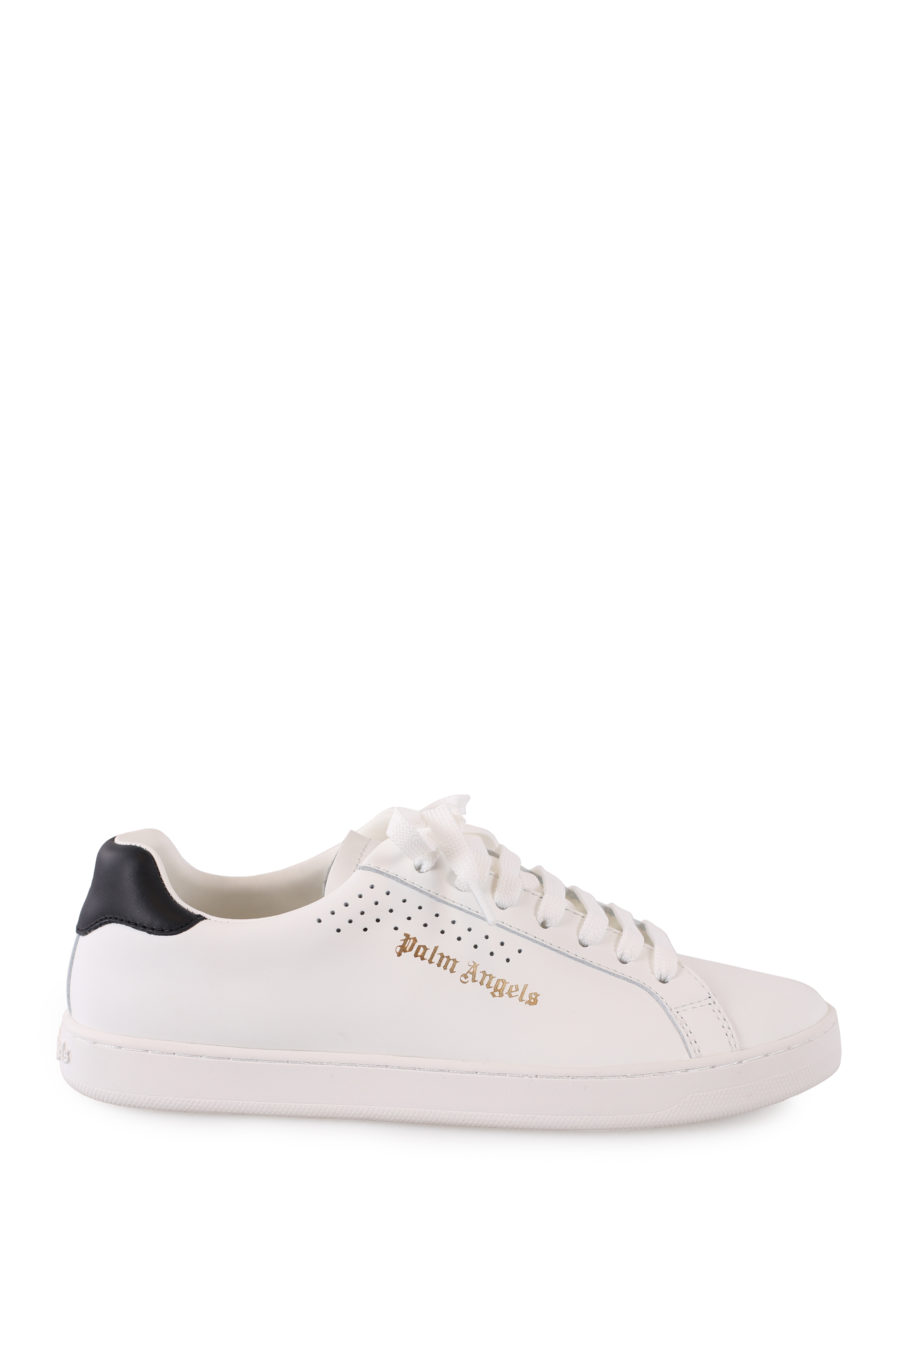 White trainers with gold logo - IMG 9049